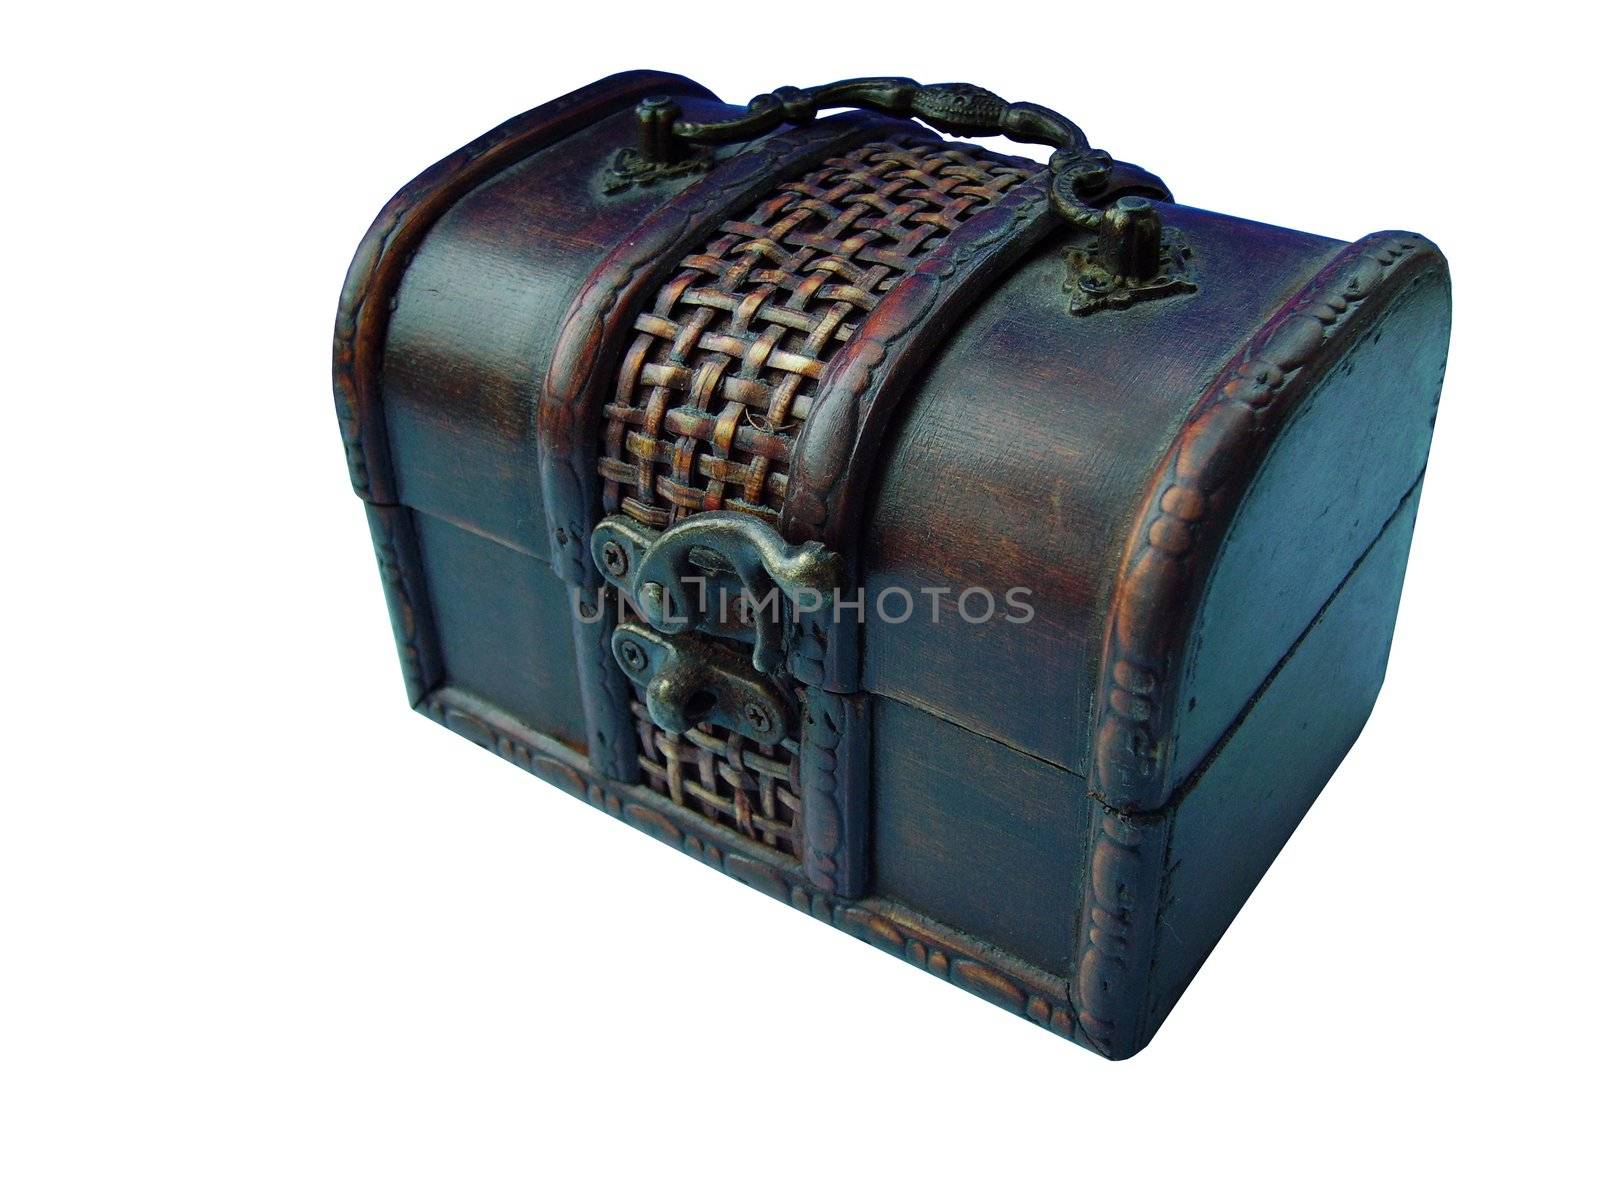 Treasure Chest taken closeup with dust on the chest, isolated on white background